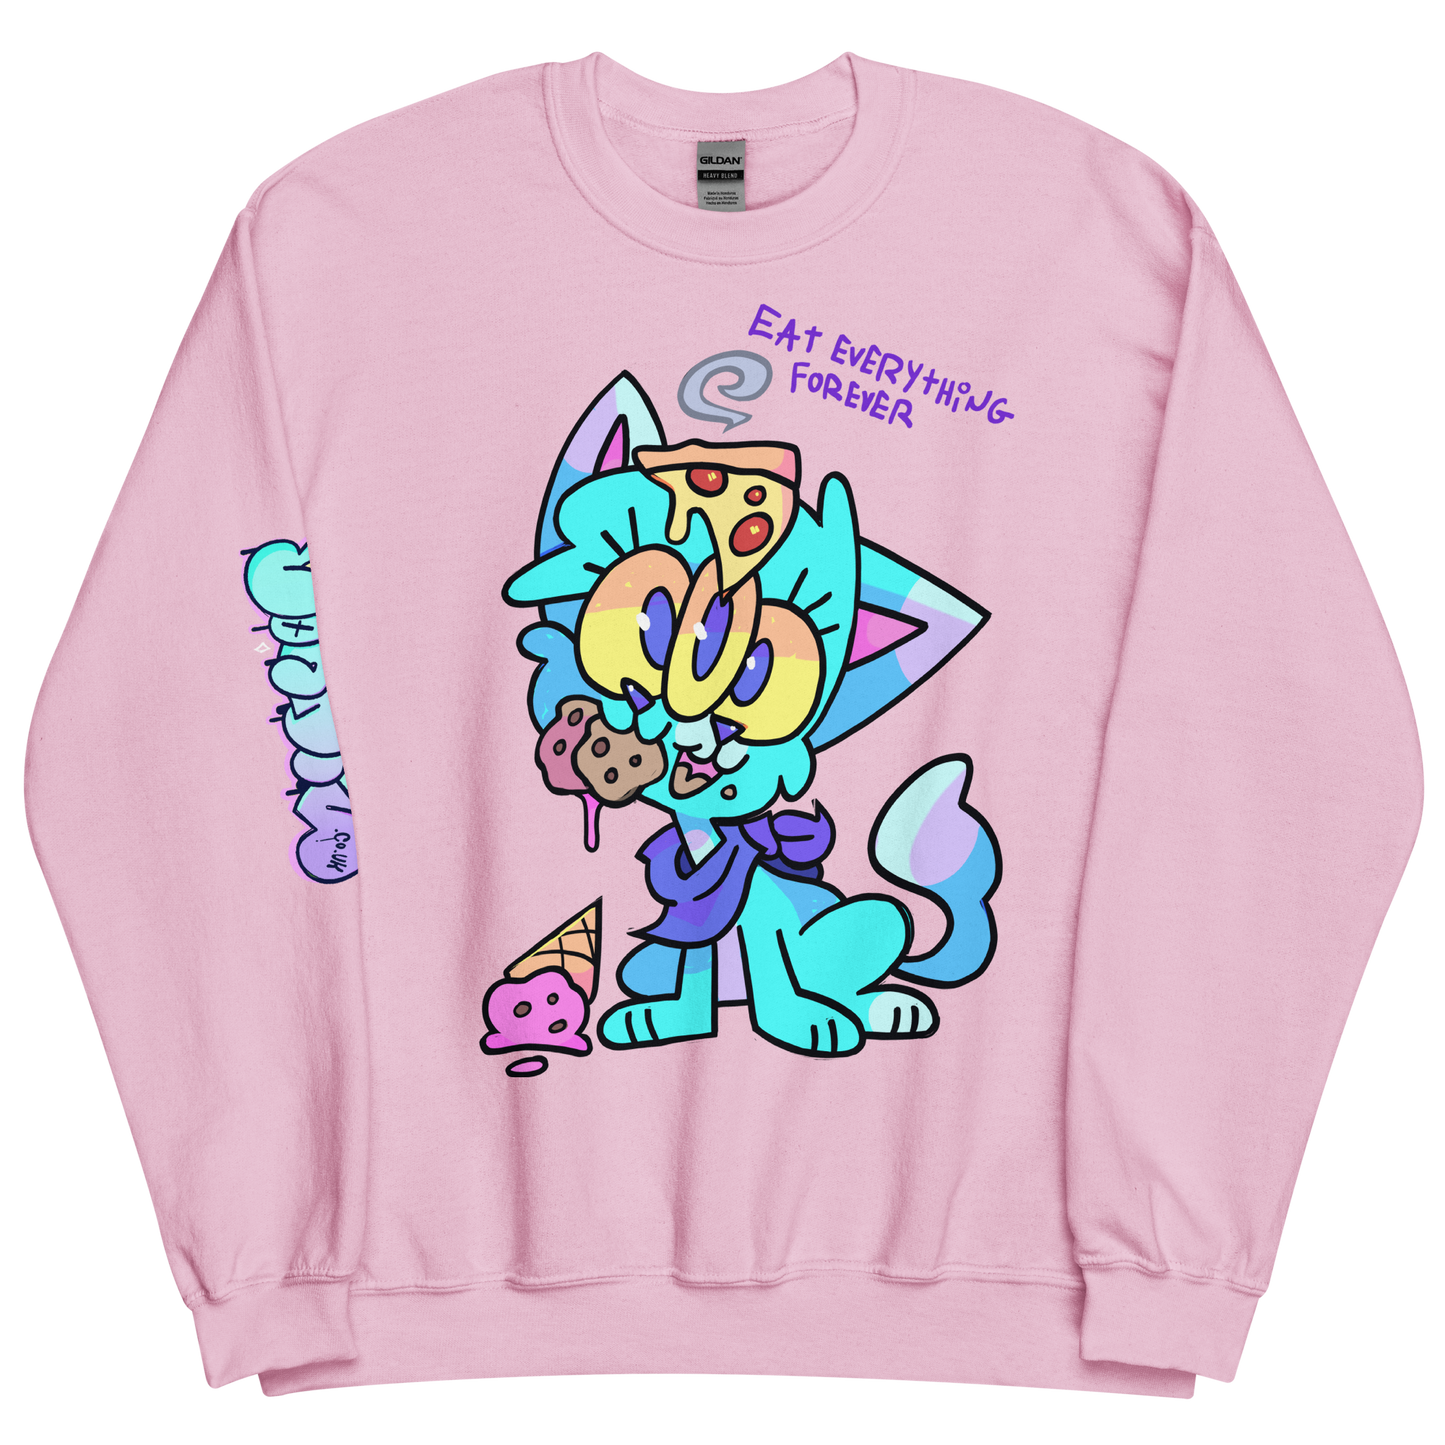 cute pink sweat shirt design with a cat character eating pizza, cookies and ice cream. captioned 'eat everything forever' designed by indie street wear brand CORKiE